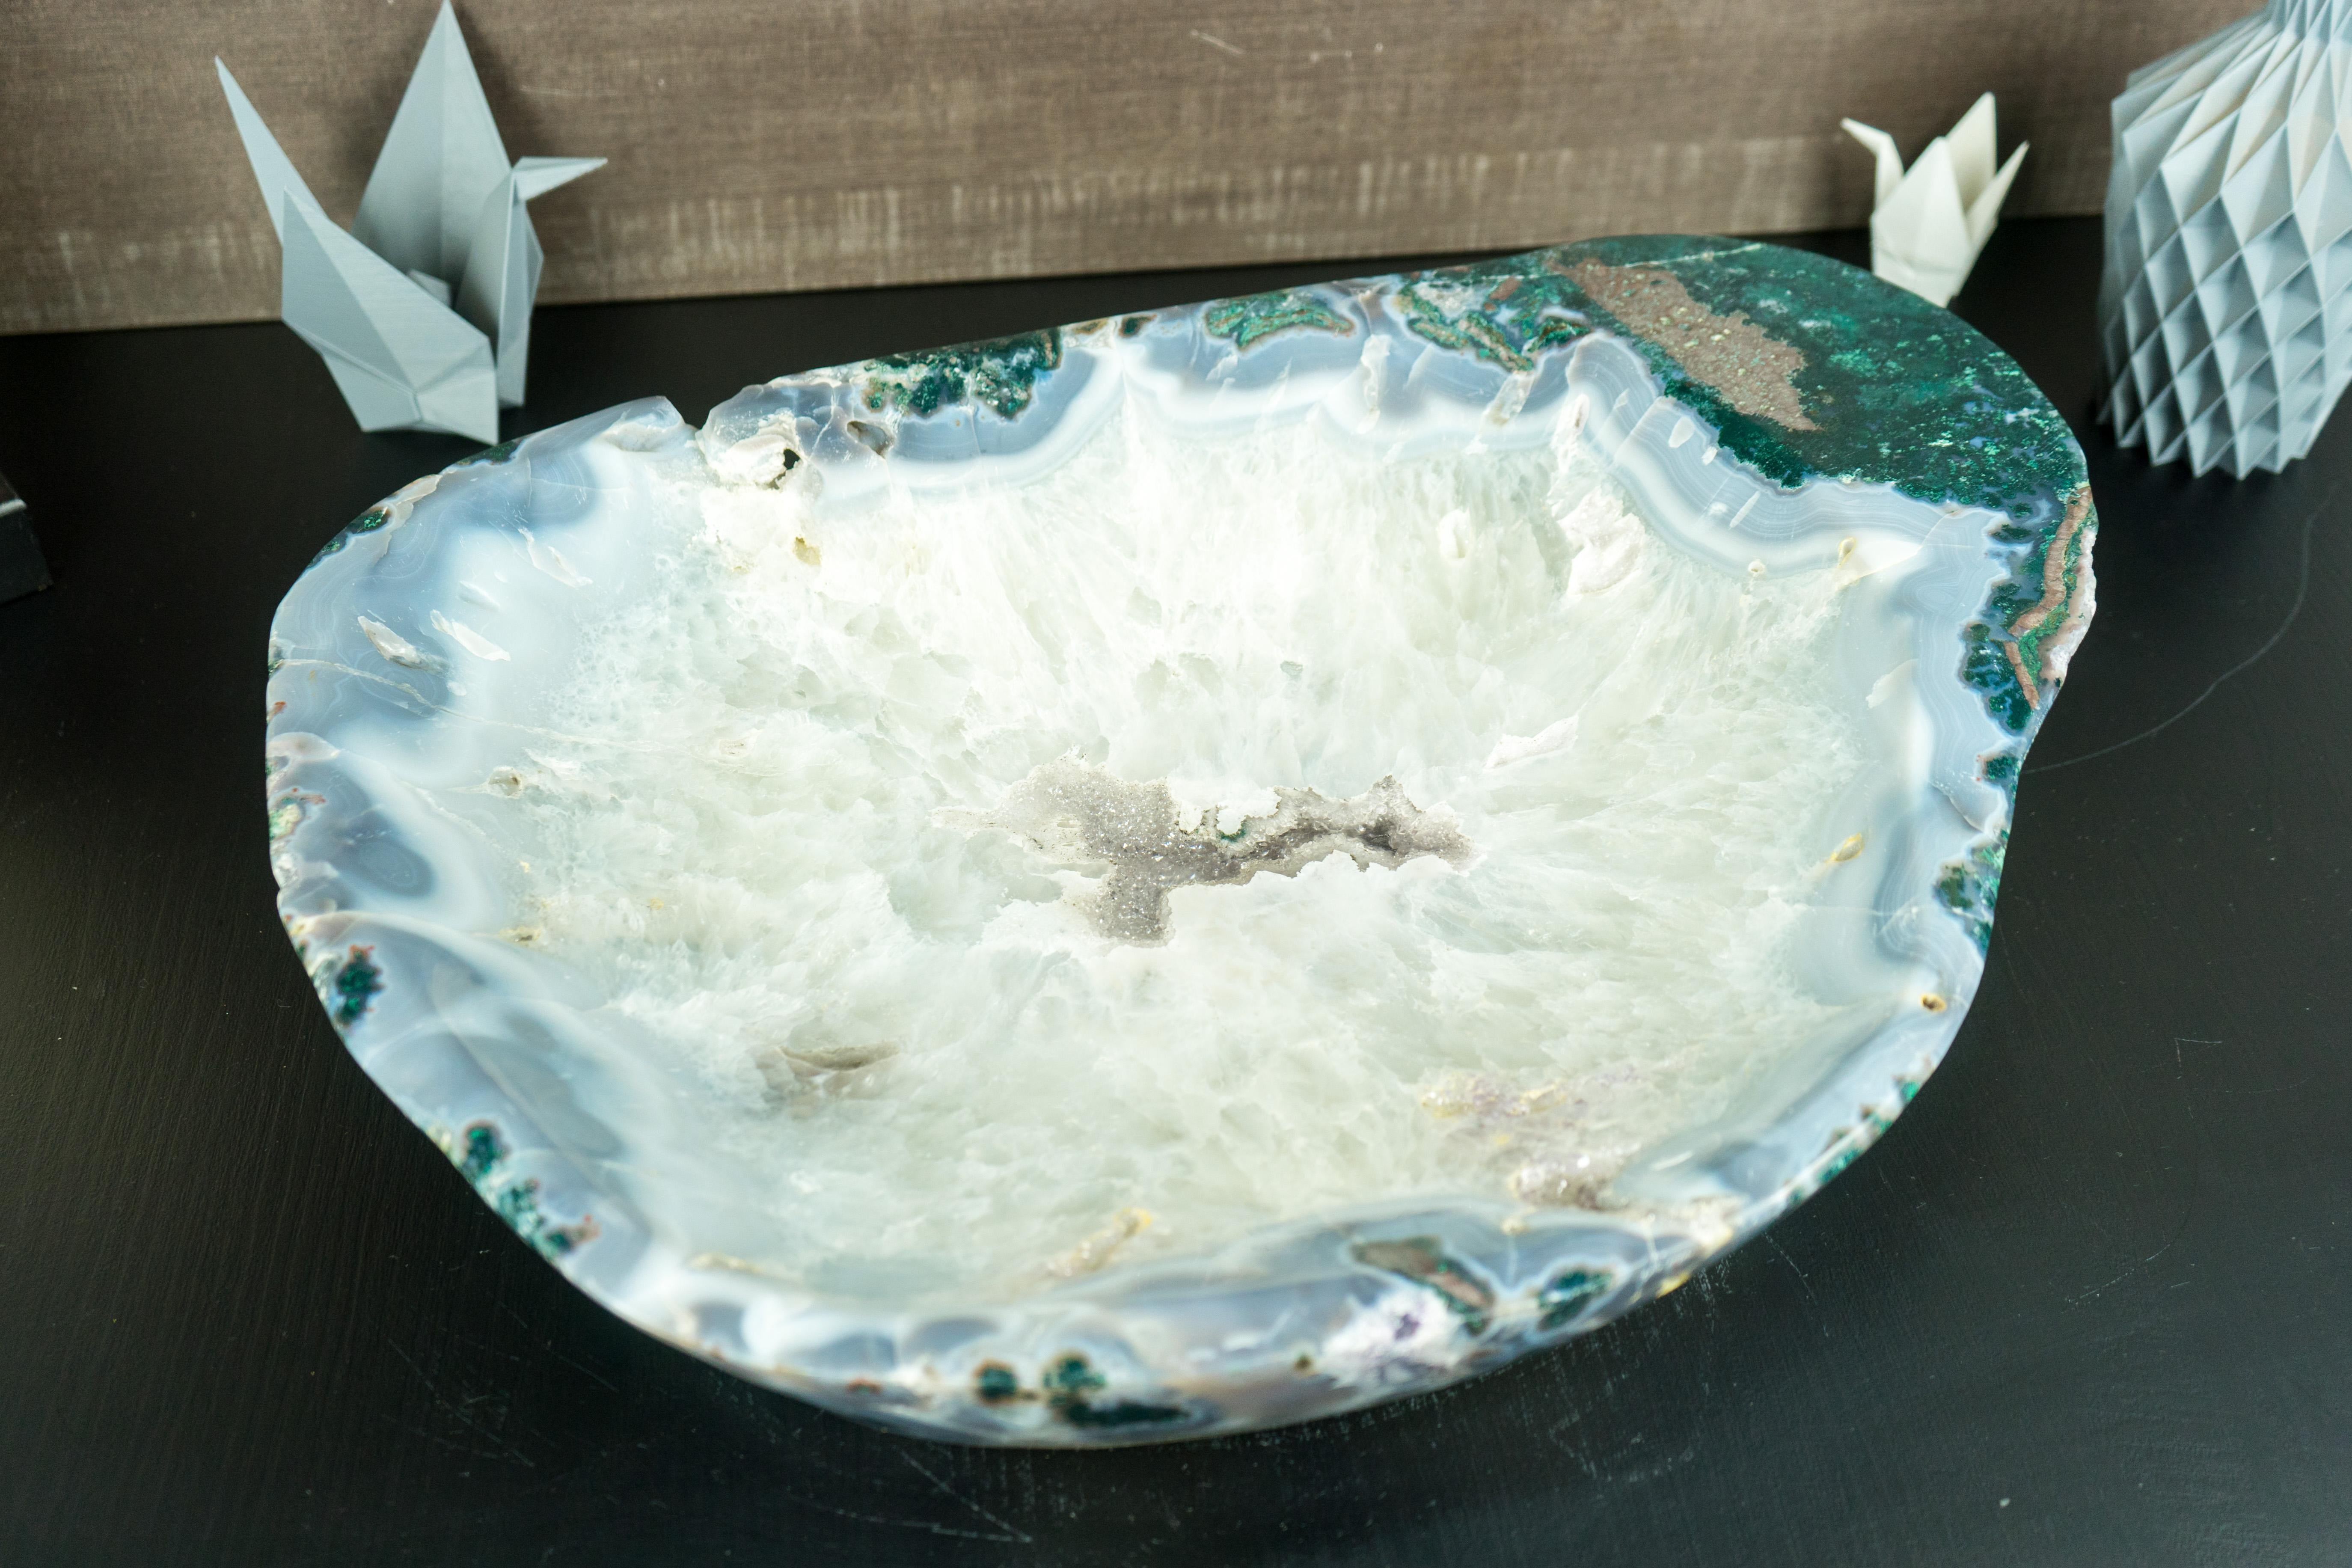 Hand-carved from a unique X-Large Lace Agate Stone, this bowl will be a perfect upgrade to your home or workspace decor. Whether used as a place to display crystals, a decorative piece, a crystal fruit bowl, or a focal point on your desk, it offers